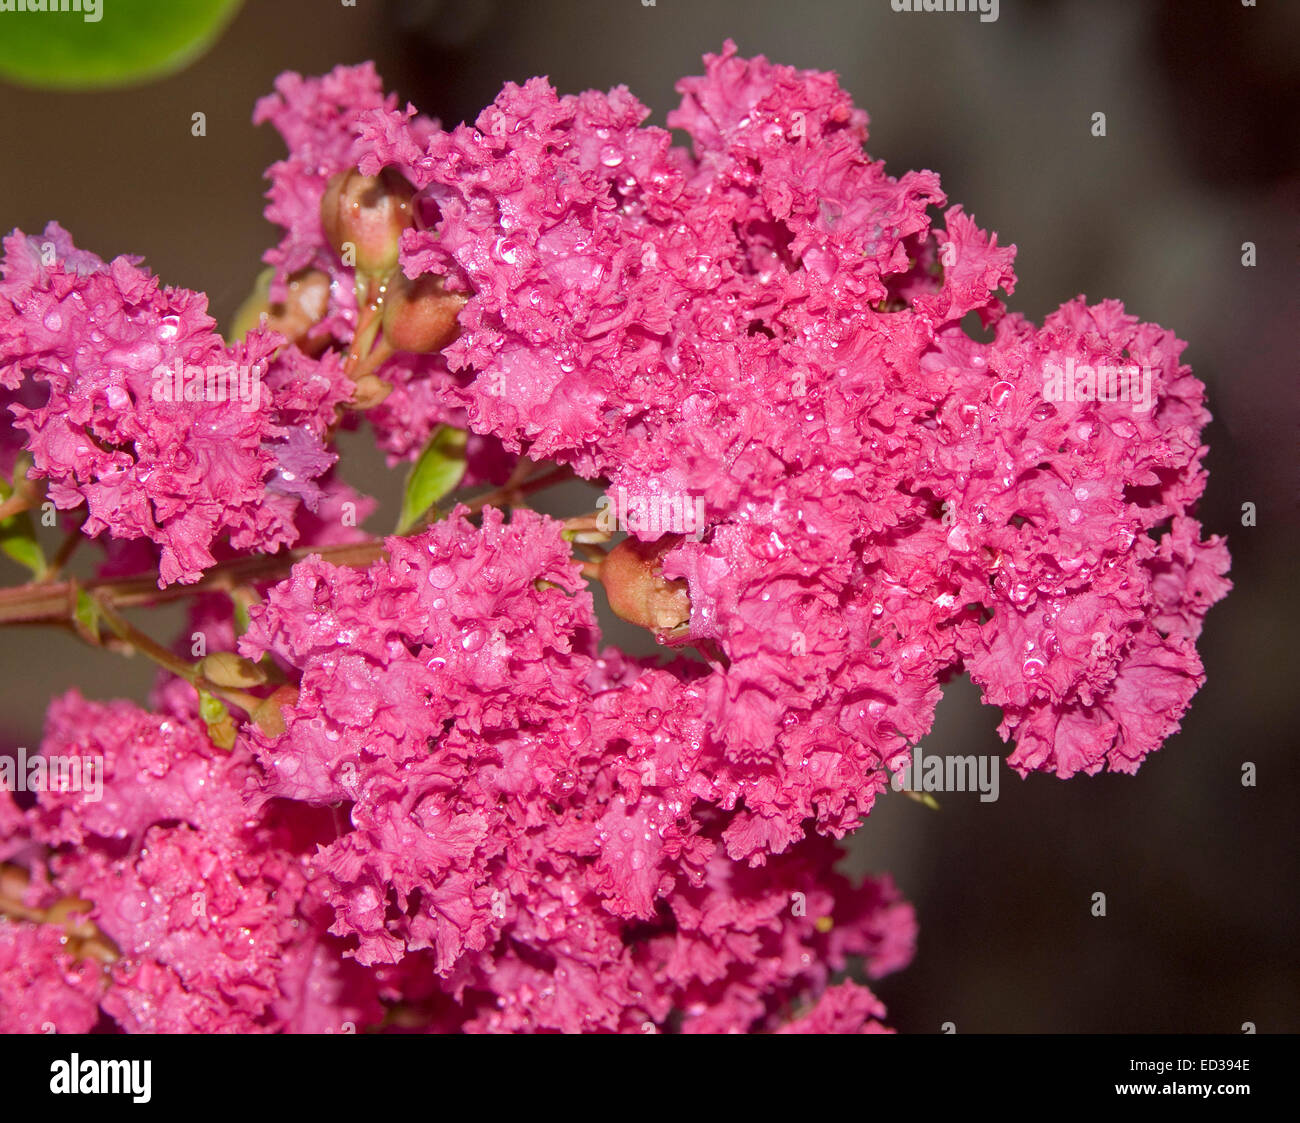 Close-up of large cluster of vivid red / pink flowers of Lagerstroemia indica, crepe myrtle, against a dark background Stock Photo